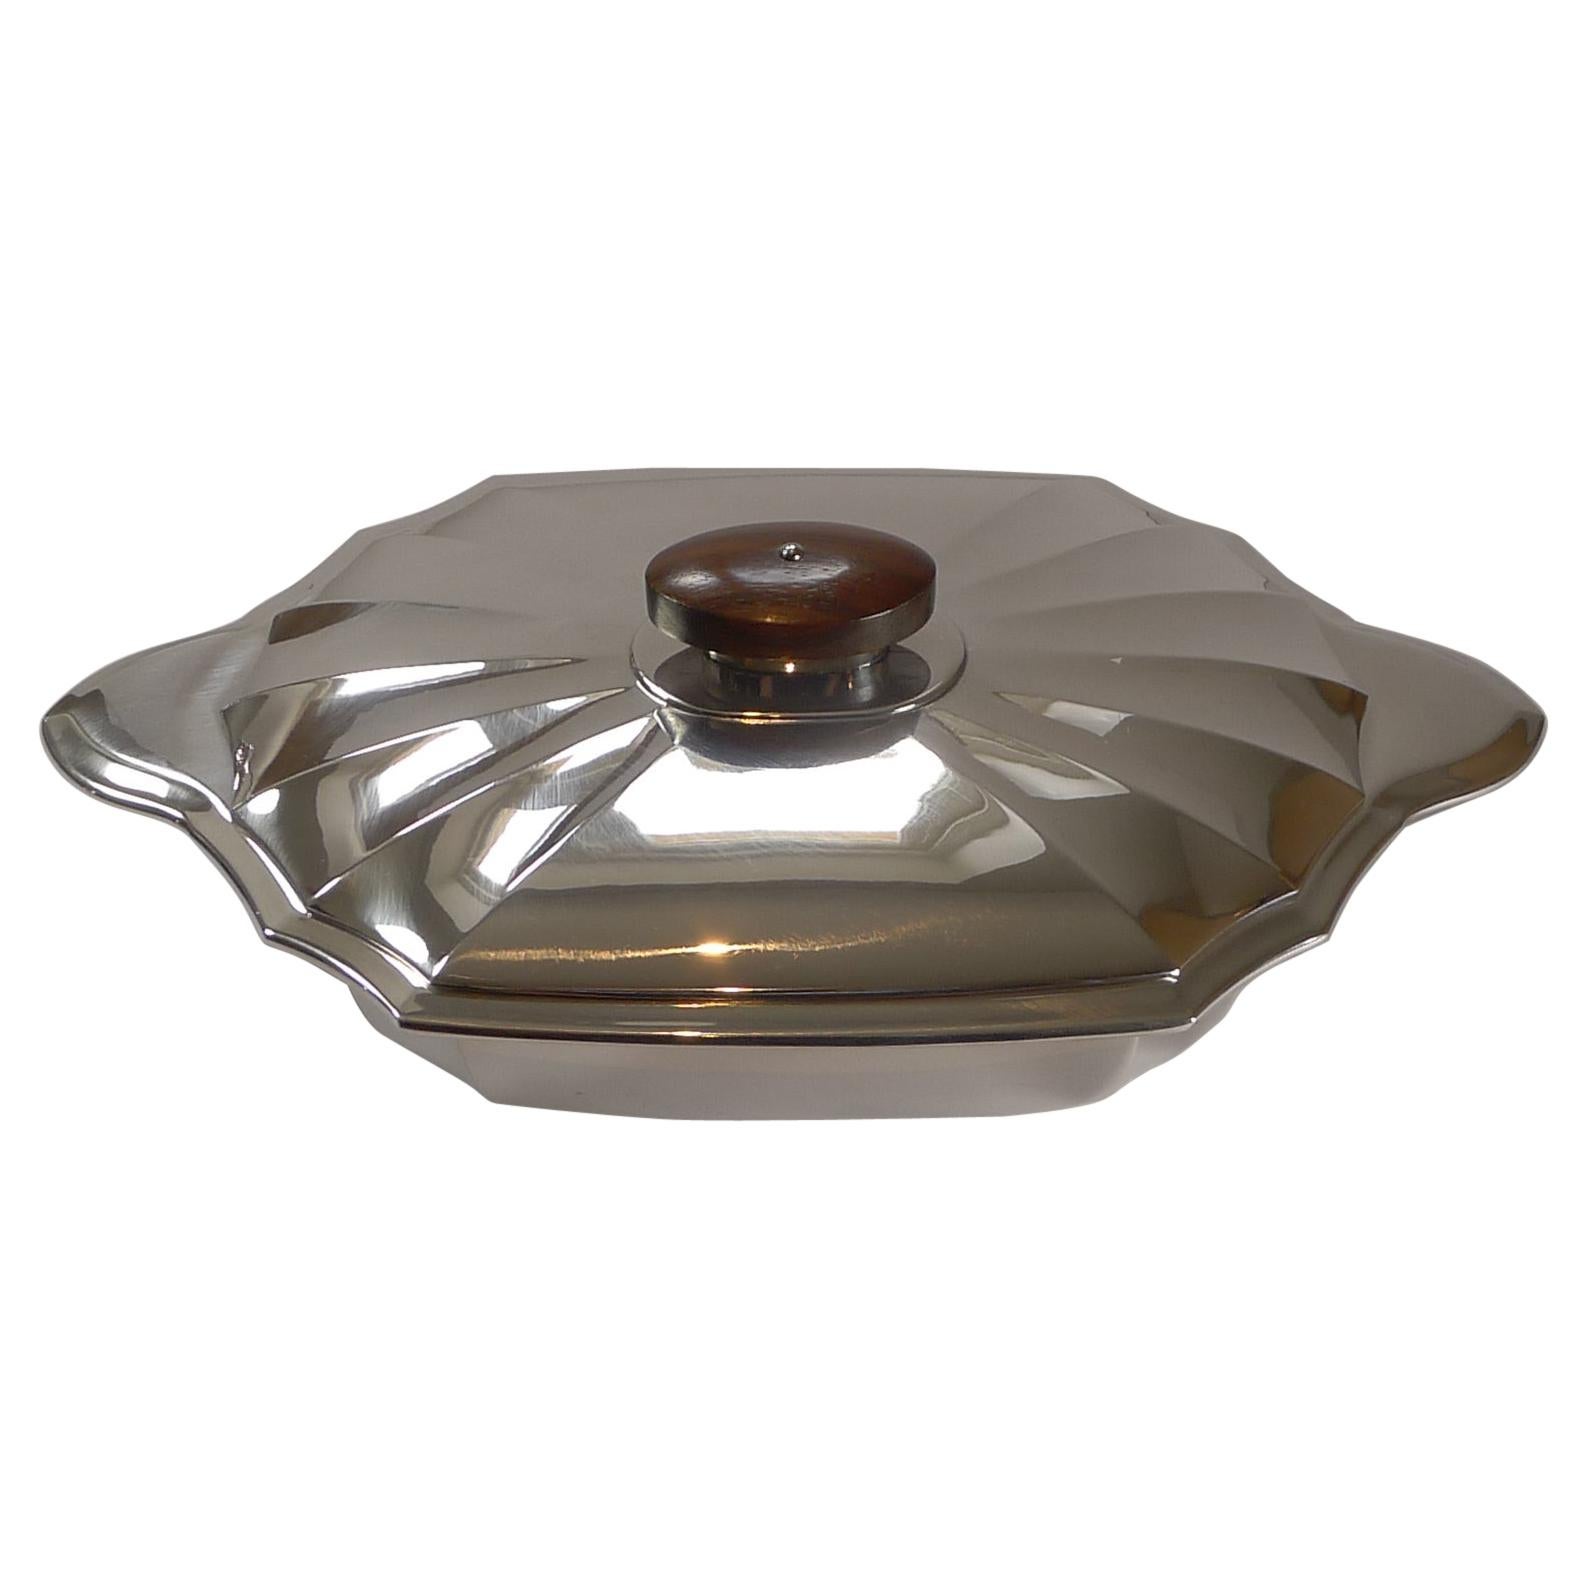 French Art Deco Christofle / Gallia Covered Serving Dish, c. 1930